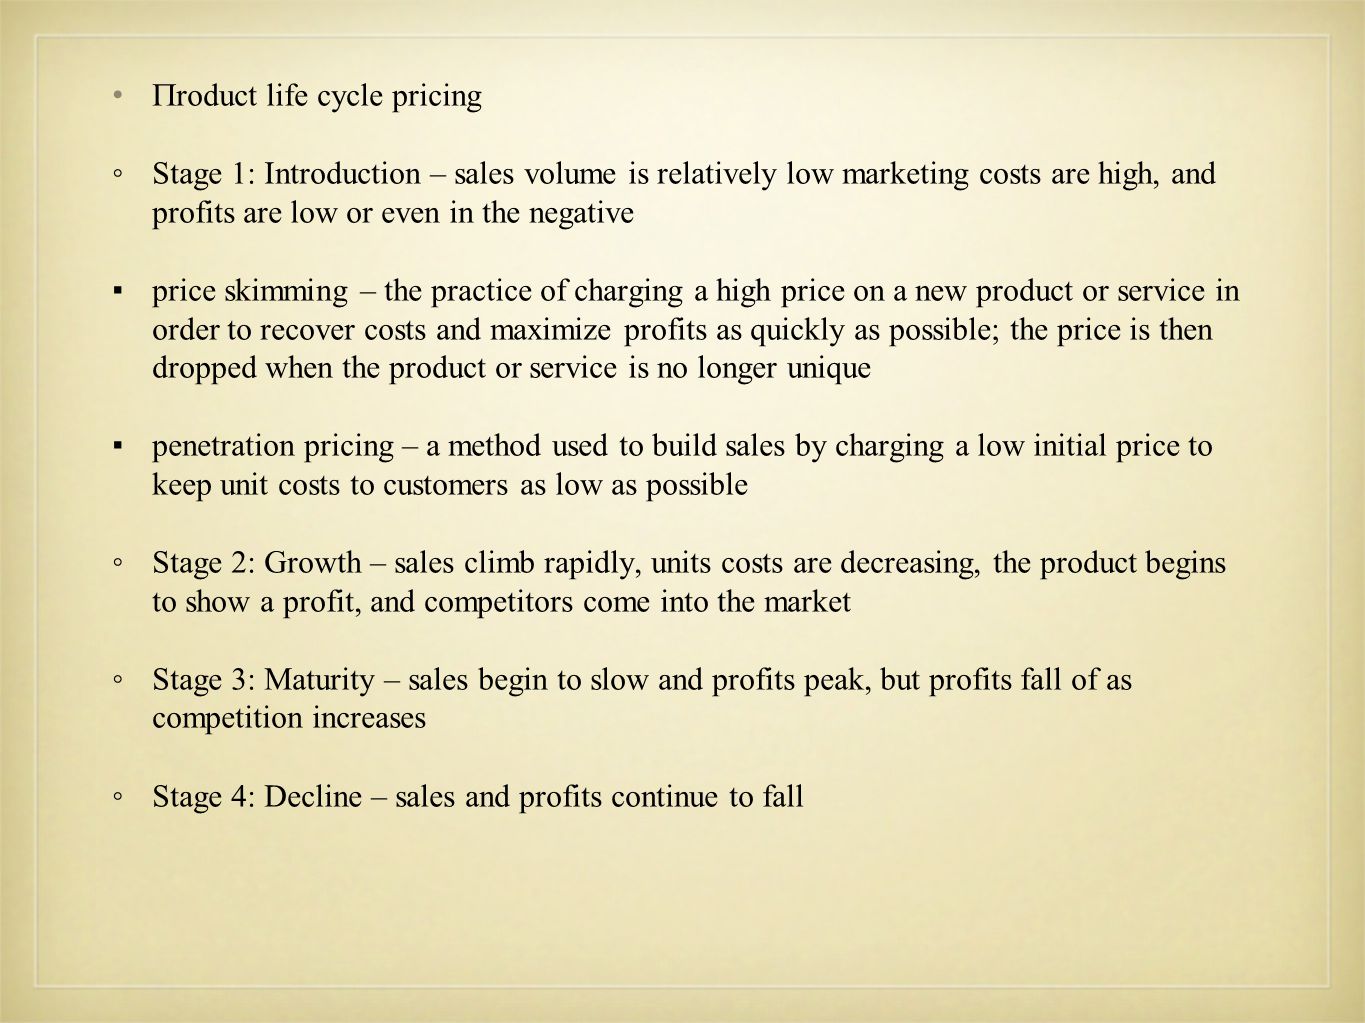 roduct life cycle pricing